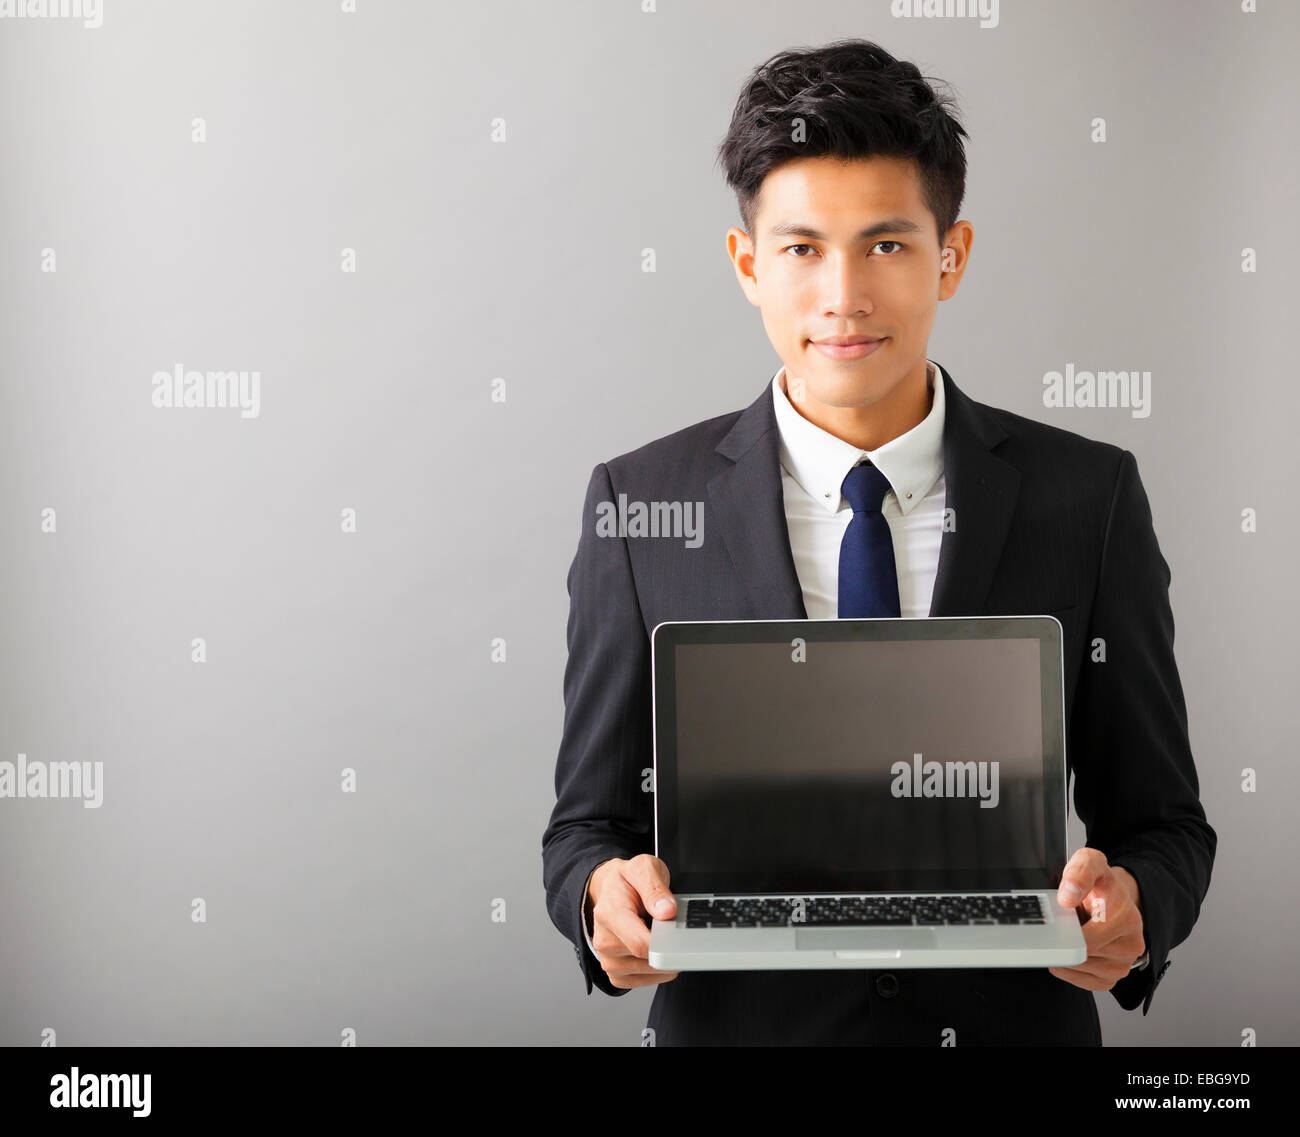 young smiling business man showing laptop Stock Photo